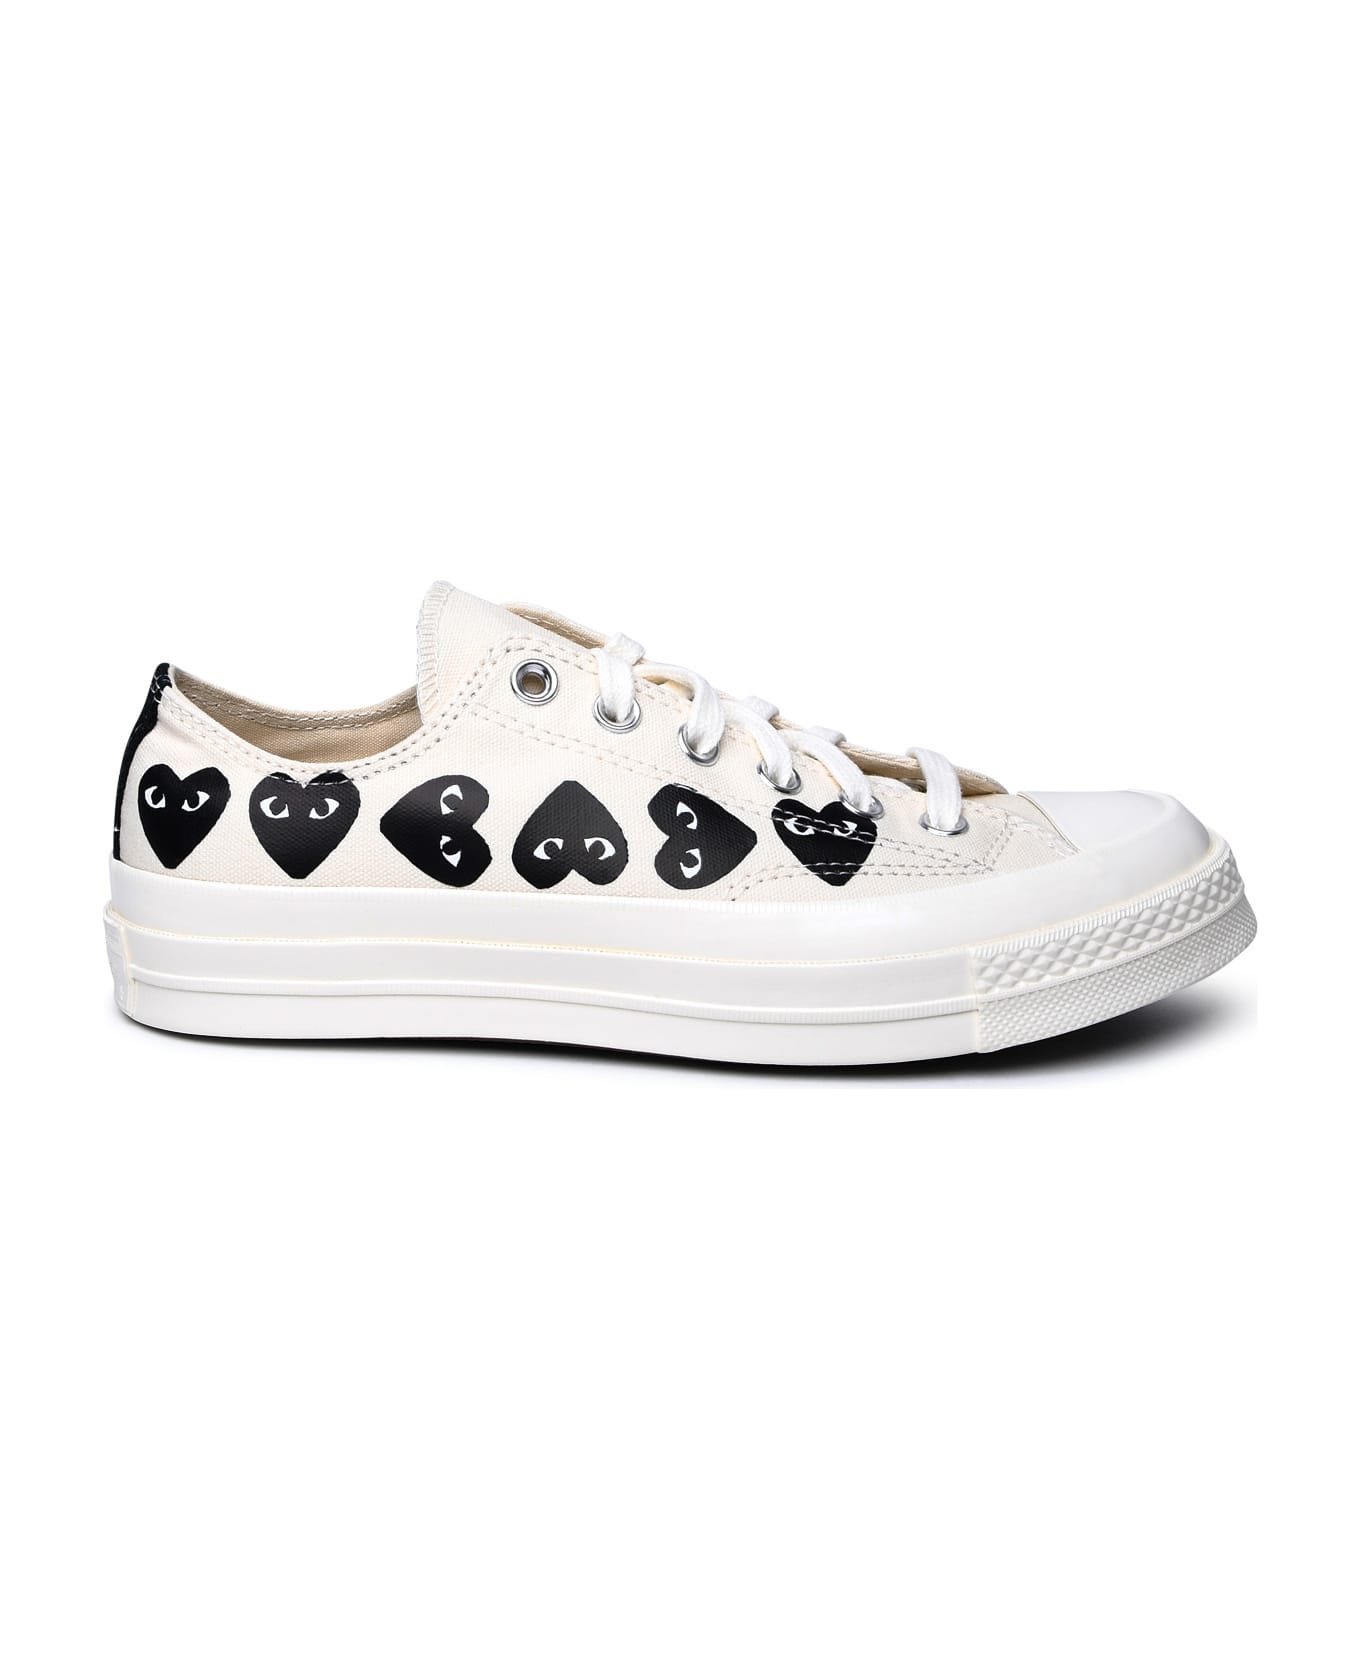 Comme des Garçons Play Ivory Fabric Sneakers - Ivory